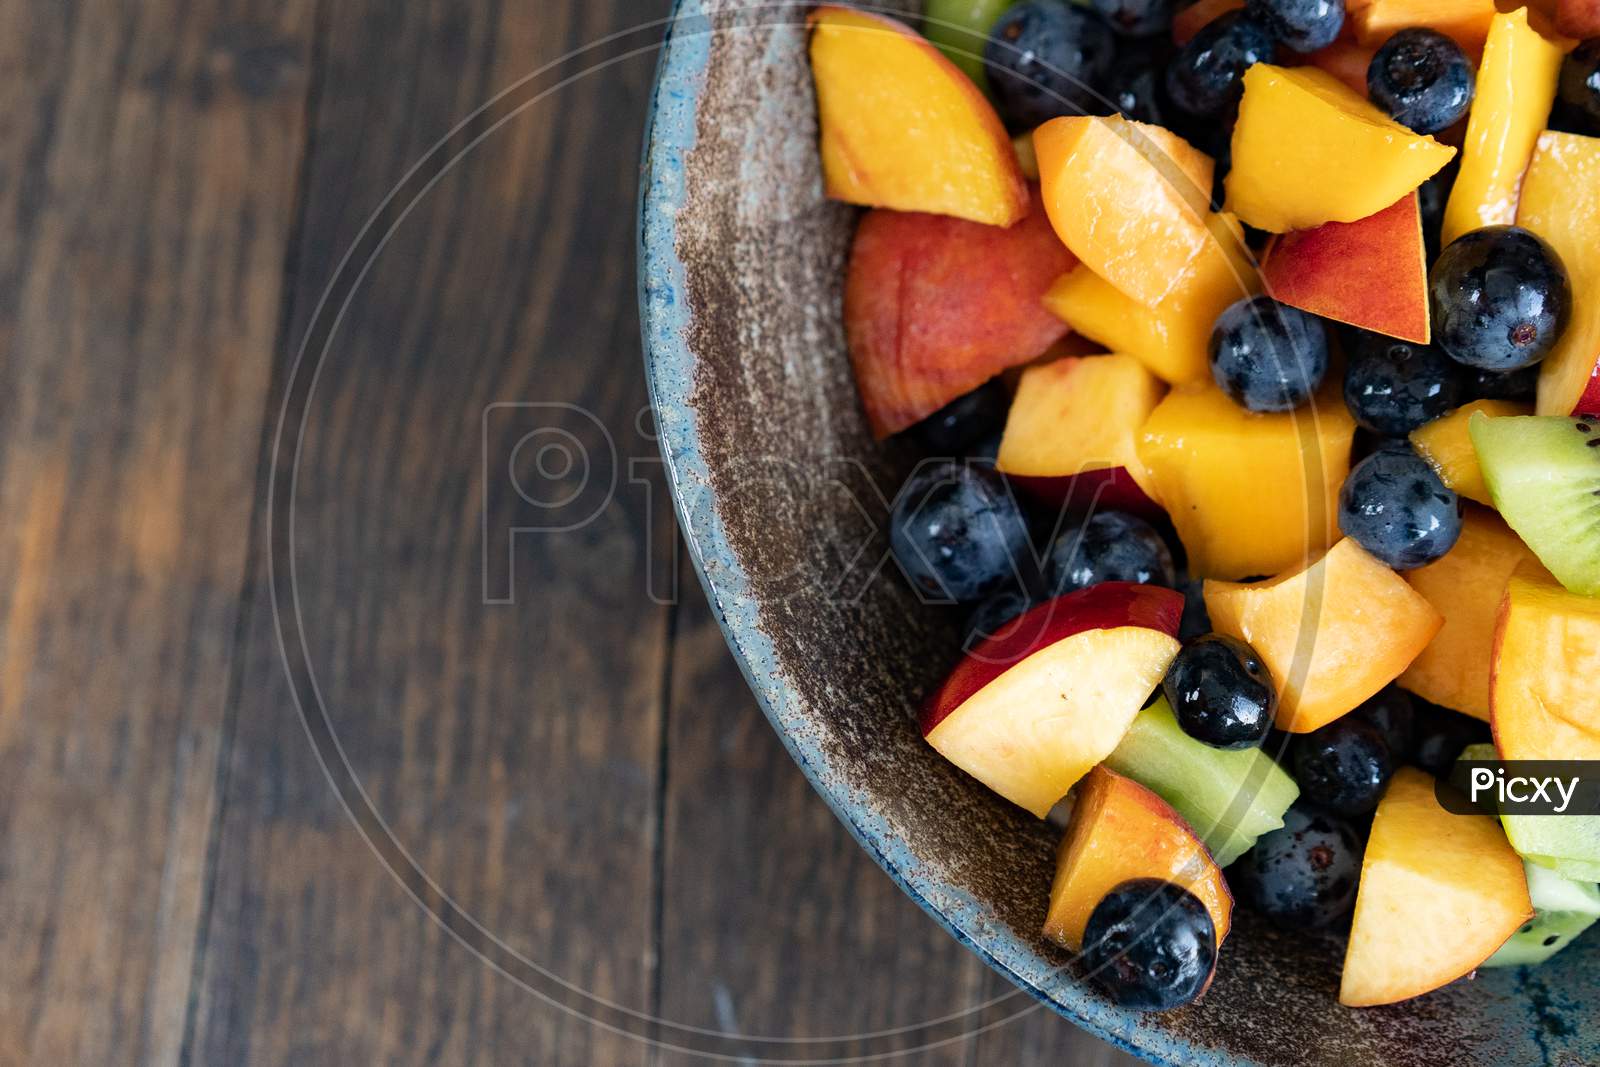 Colorful fresh fruit salad in dark bowl on wooden table in daytime